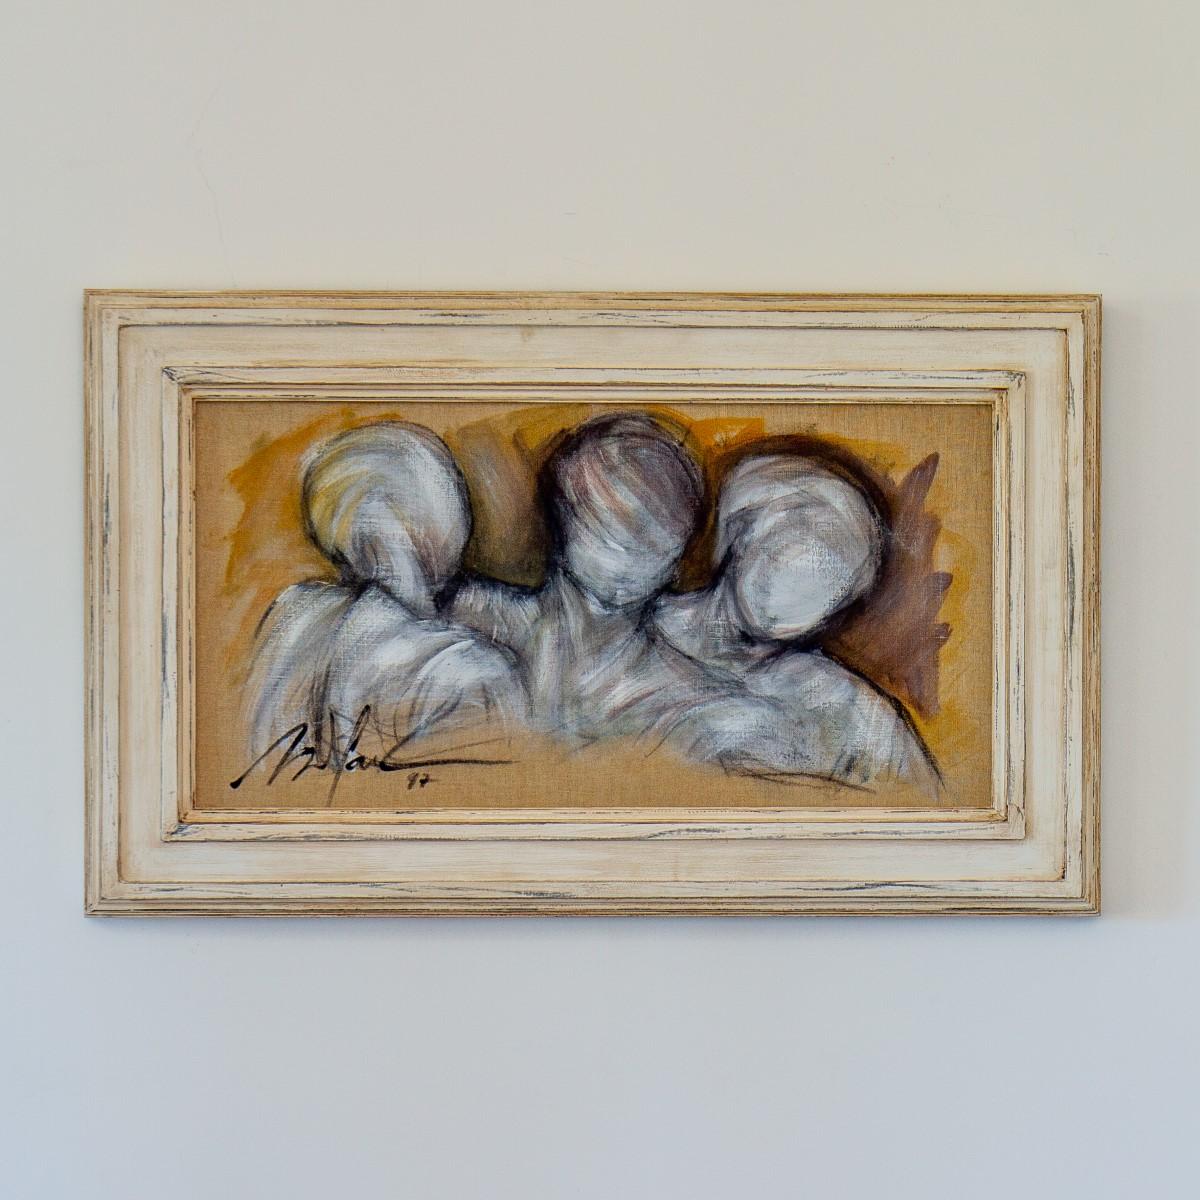 A French framed oil on canvas painting of three figures heads, by Mickey Pfau 1997, signed and dated.

Bought directly from the artist in the 1990s by Ken, for his own private collection. These paintings would look as a single piece of artwork but